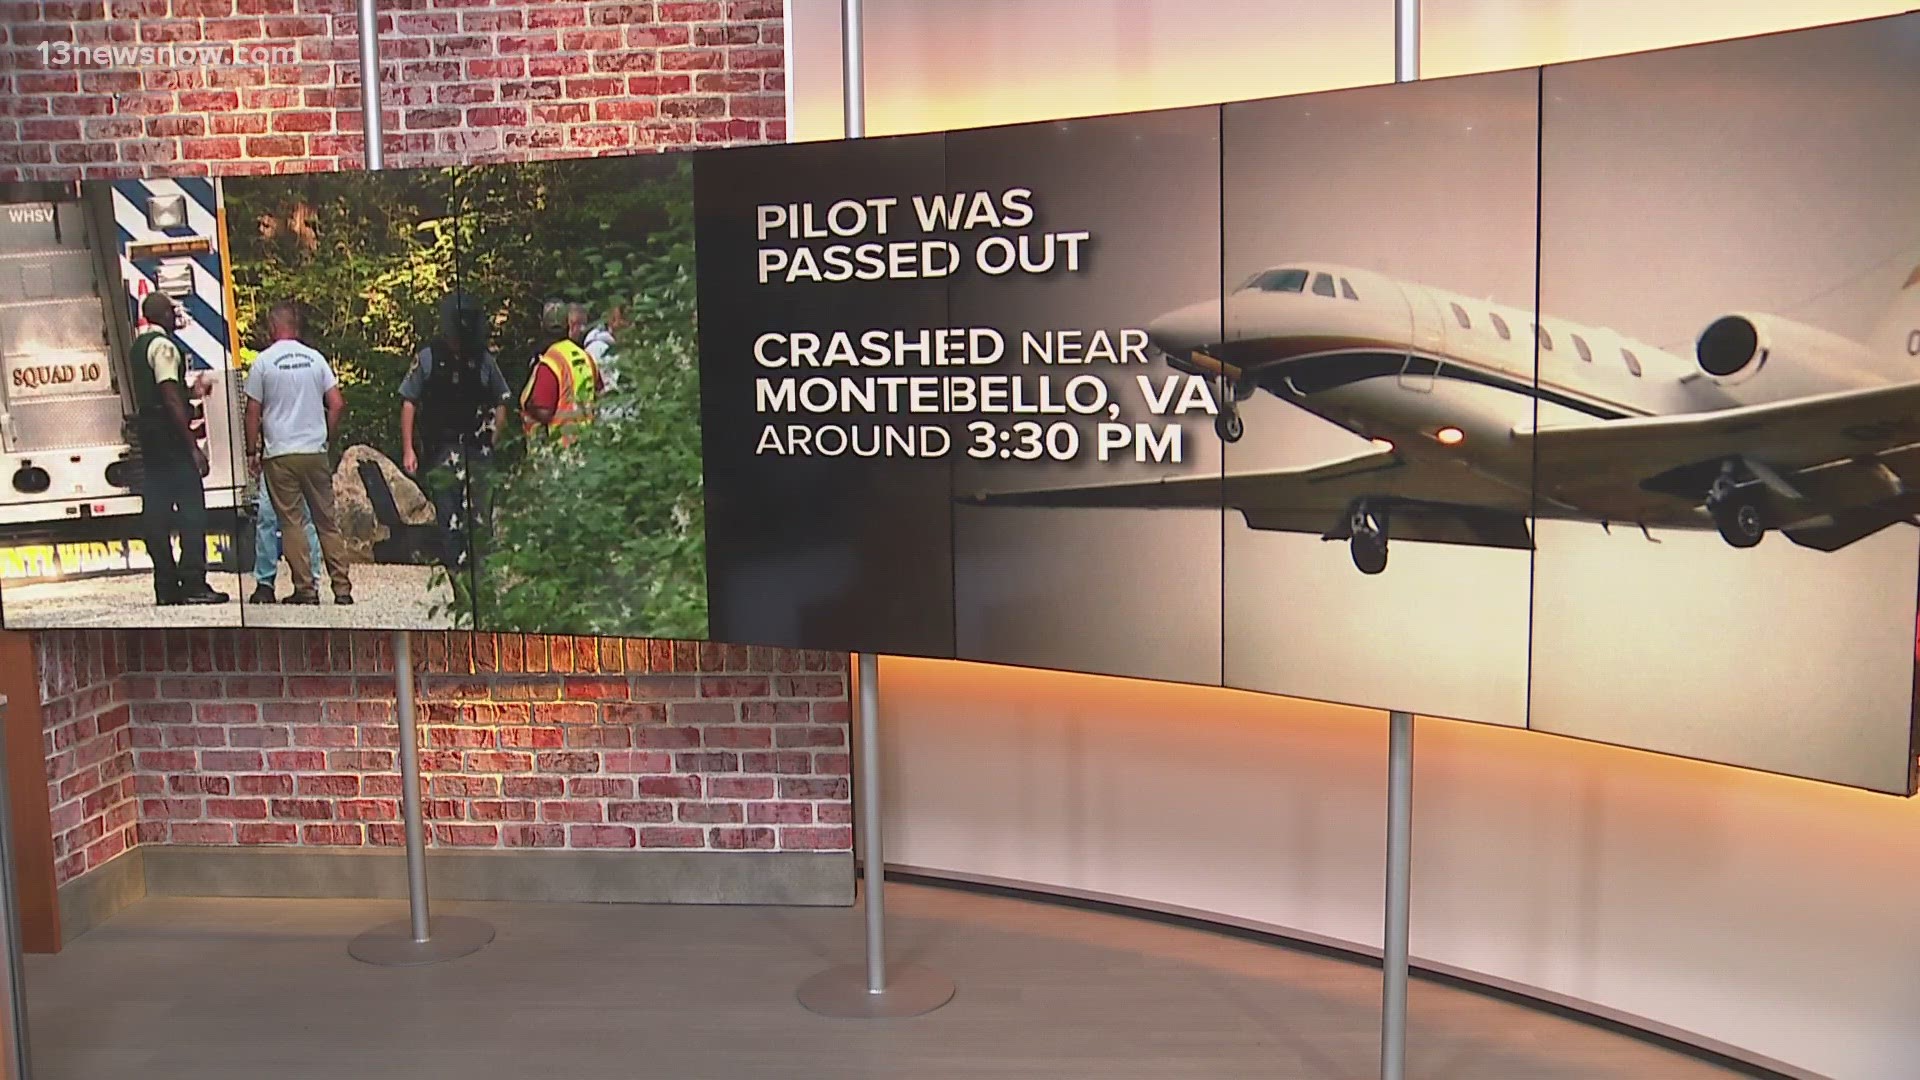 A pilot passed out with 4 people on board and crashed in Southwest Virginia. State police say they found no survivors.